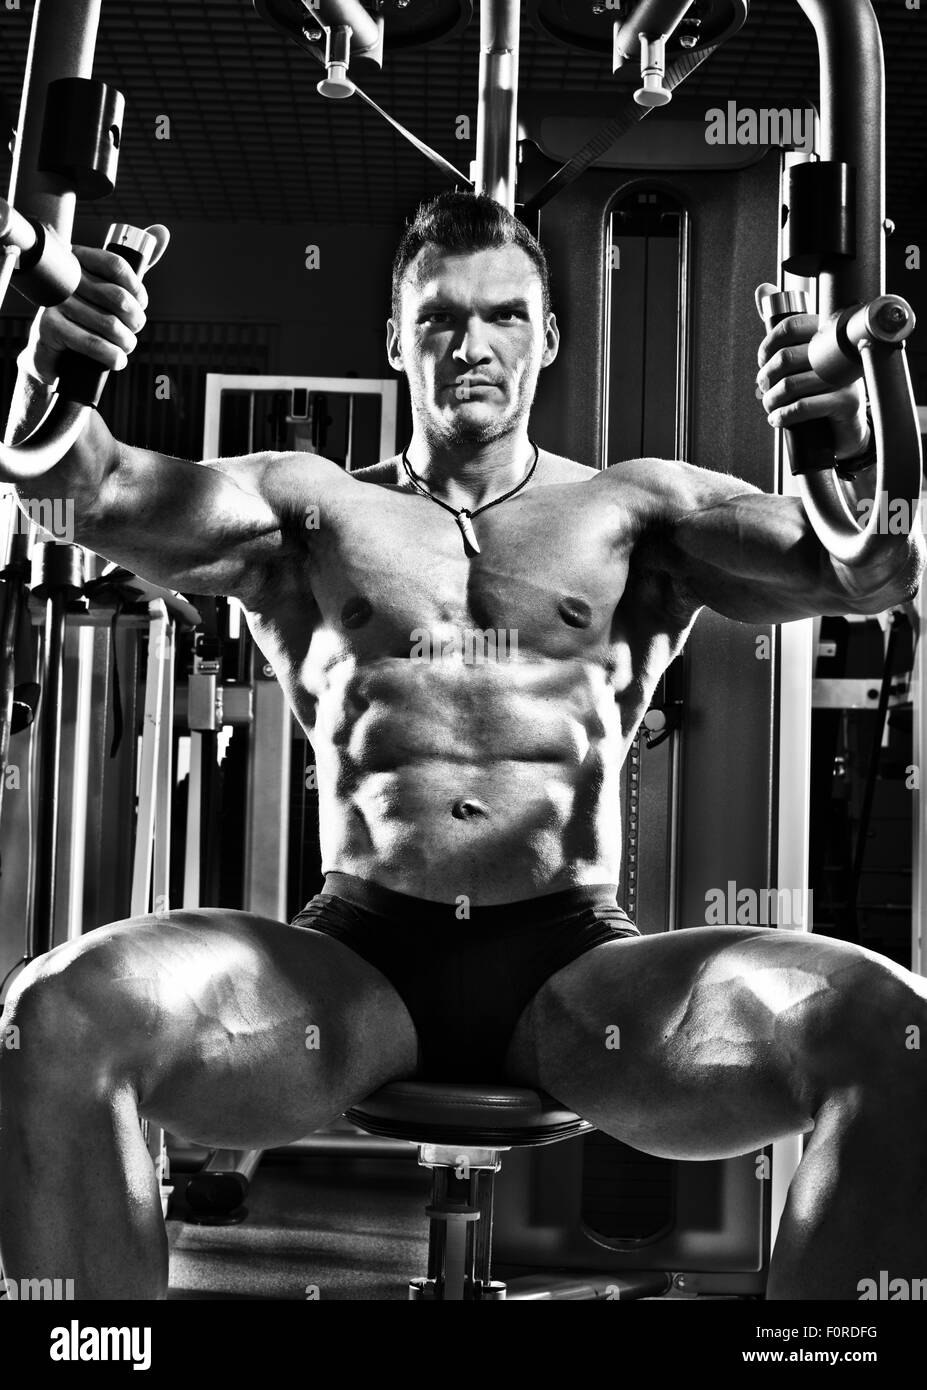 very brawny guy bodybuilder ,  execute exercise  on gym apparatus Butterfly Machine, in gym. Black-and-white photo Stock Photo